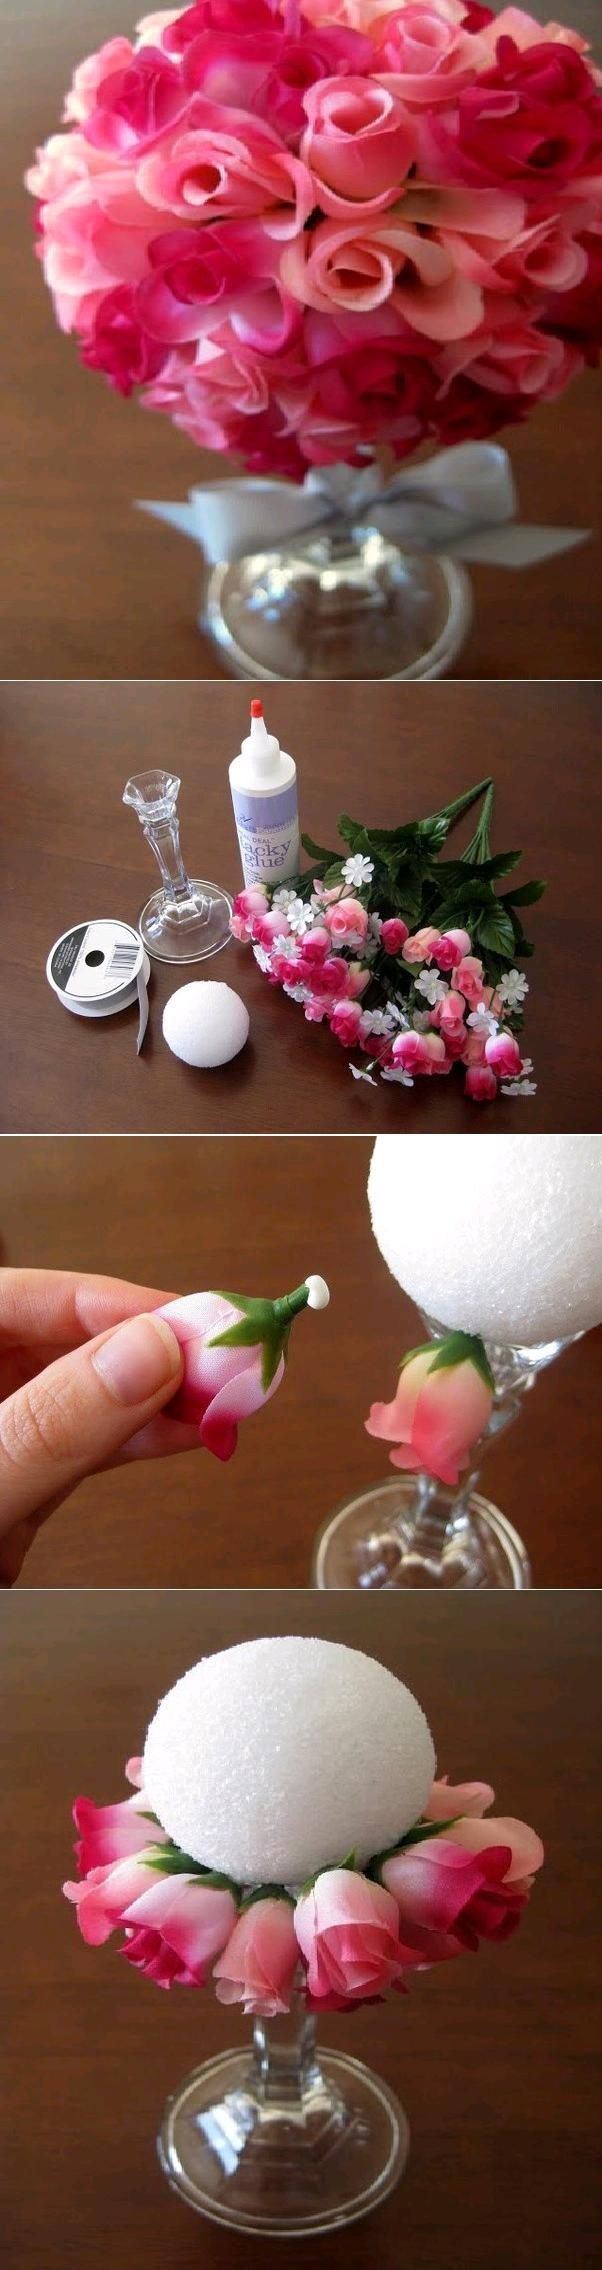 DIY Simple Flower Ball Bouquet!! Easy and super cute.